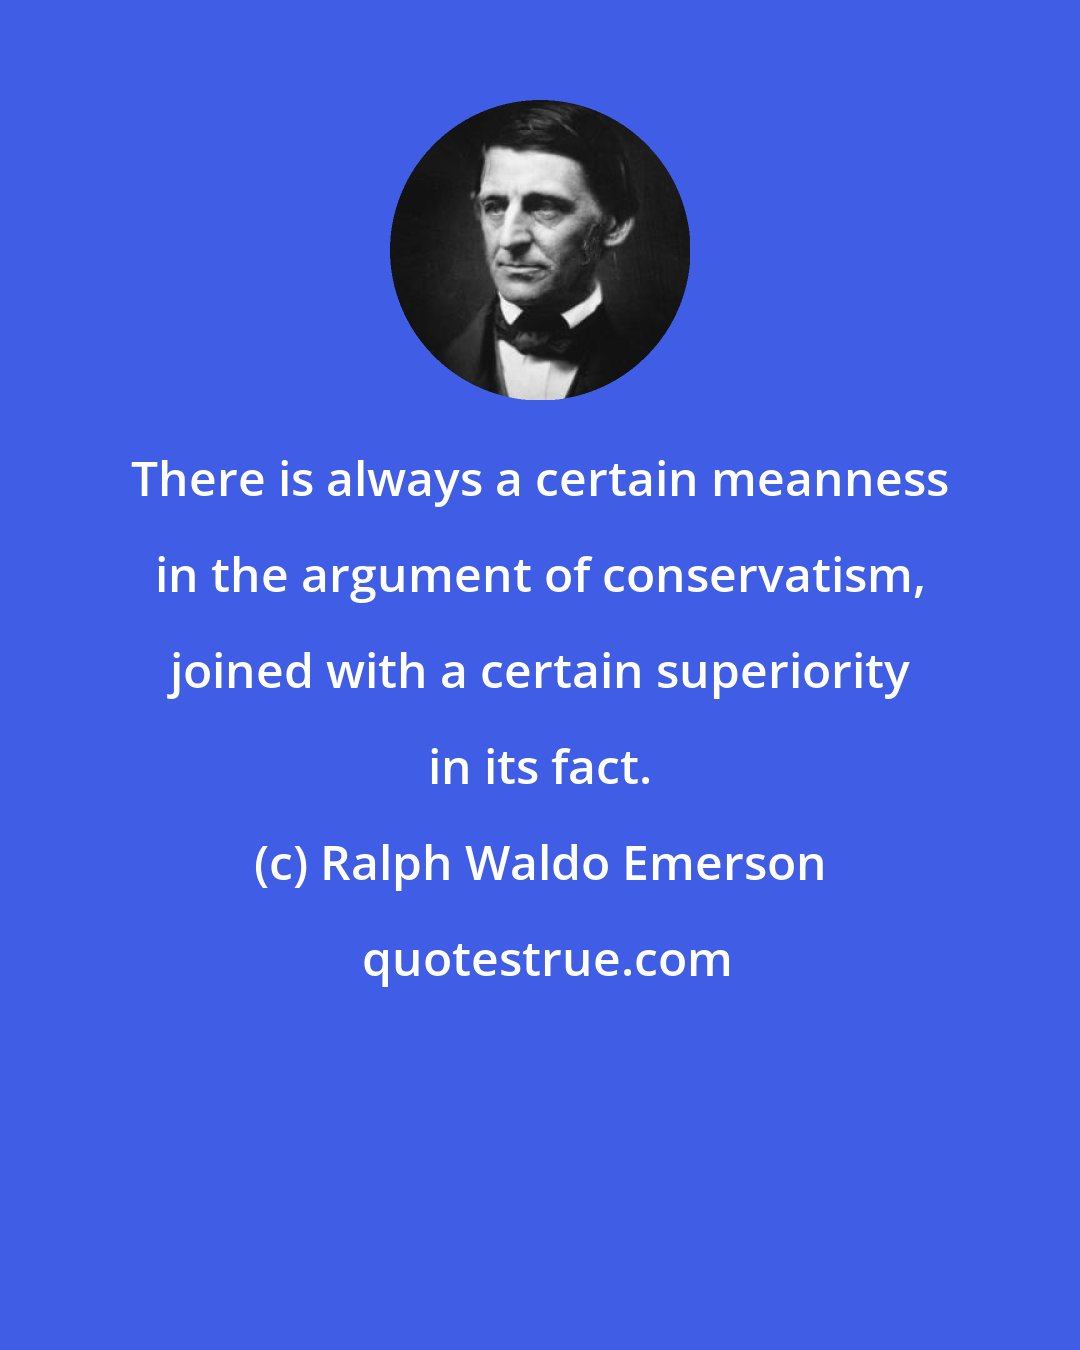 Ralph Waldo Emerson: There is always a certain meanness in the argument of conservatism, joined with a certain superiority in its fact.